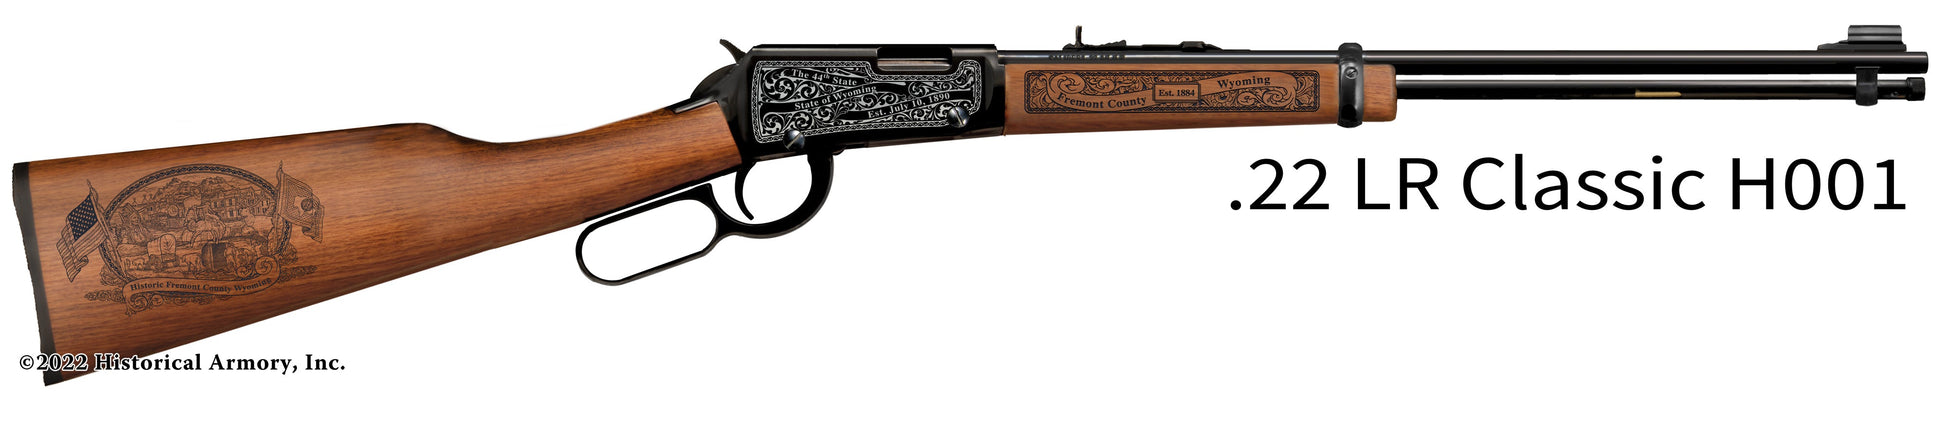 Fremont County Wyoming Engraved Henry H001 Rifle